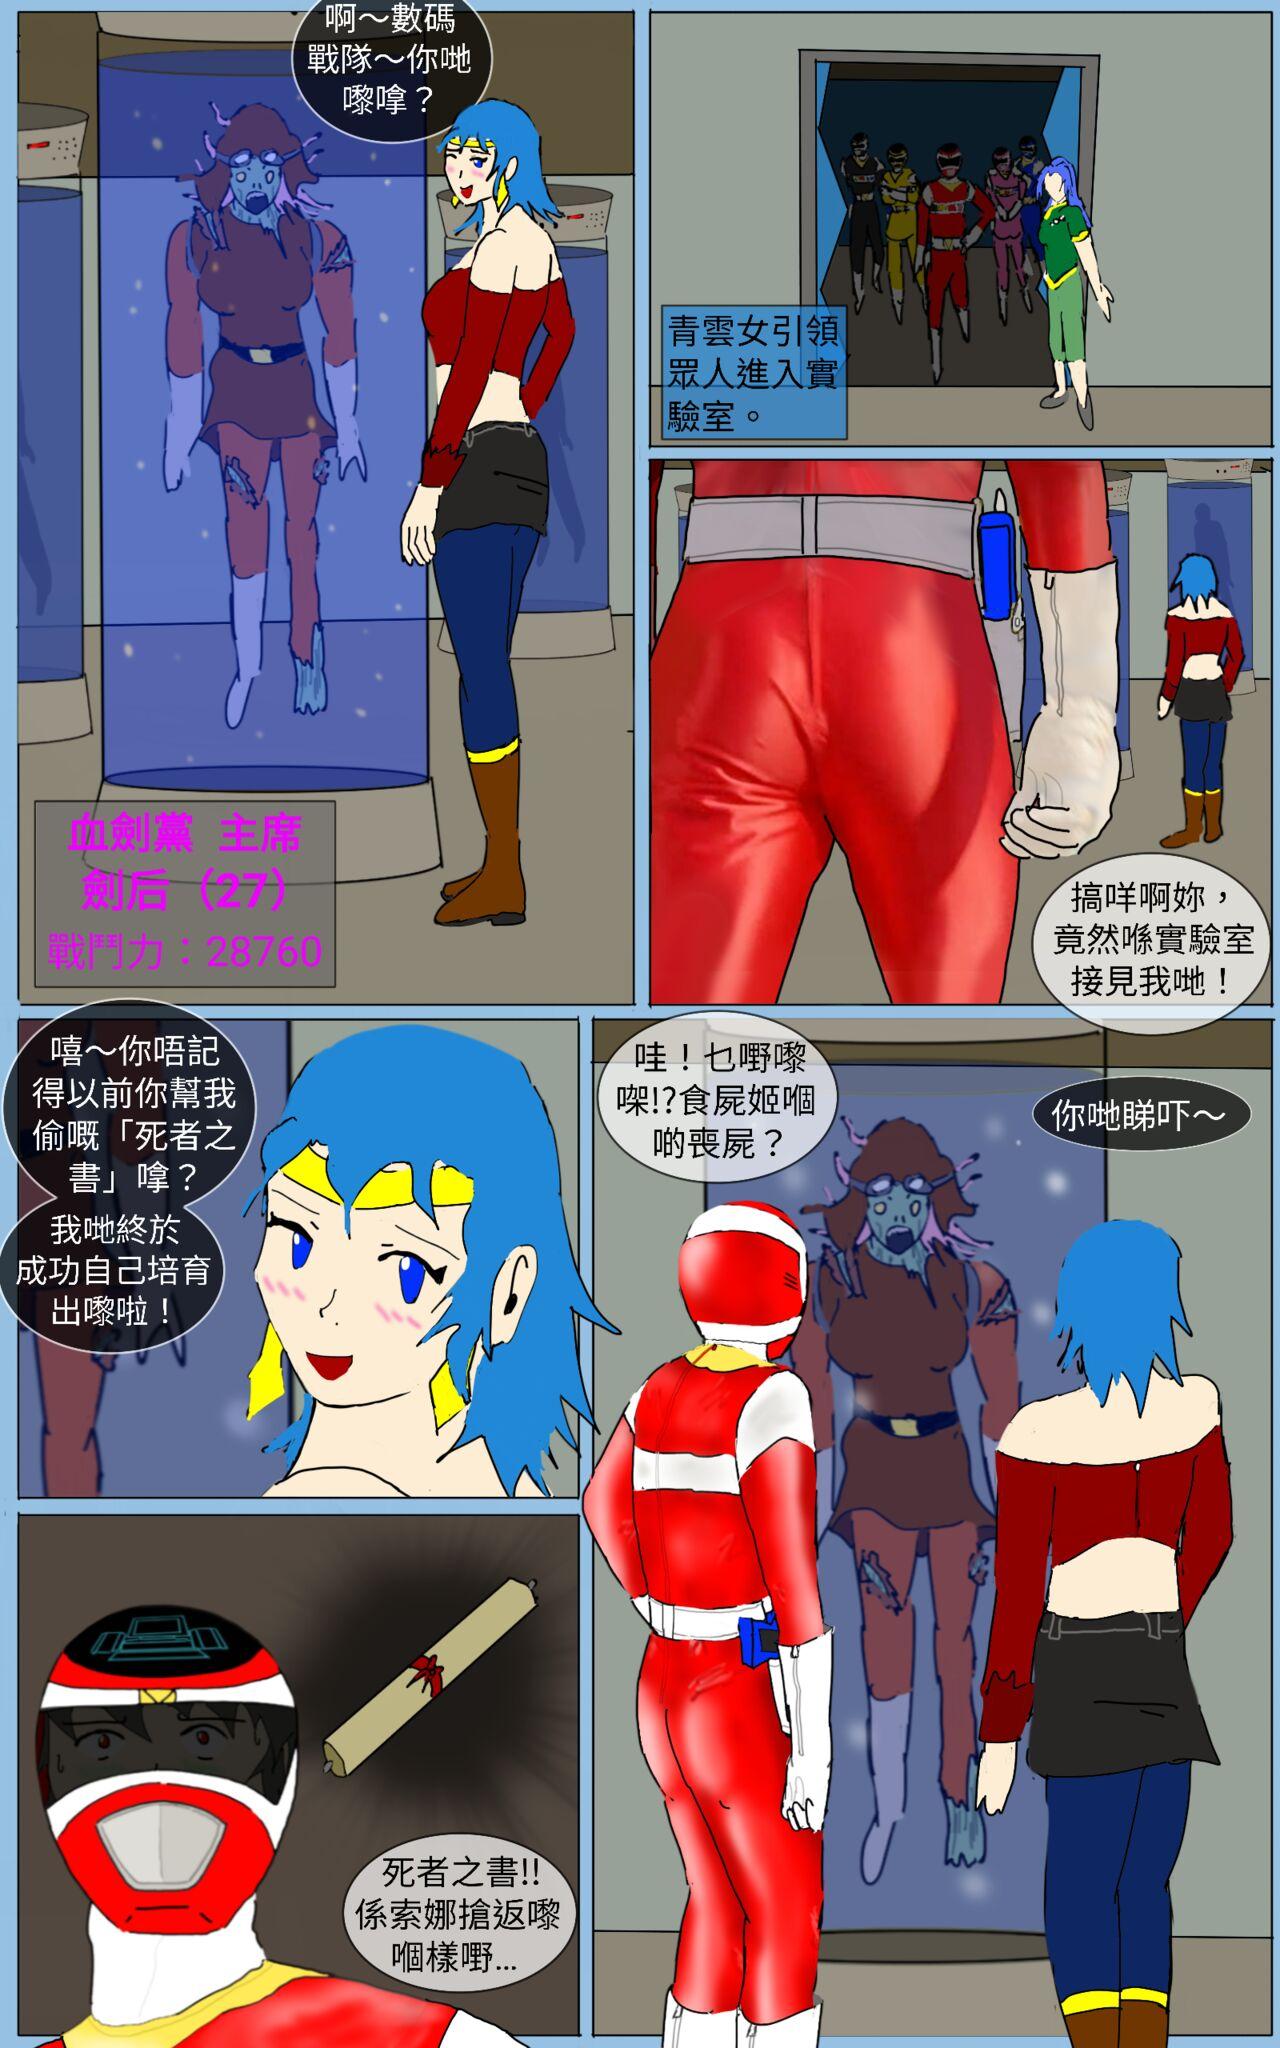 Family Roleplay Mission 32 - Super sentai Mojada - Picture 3